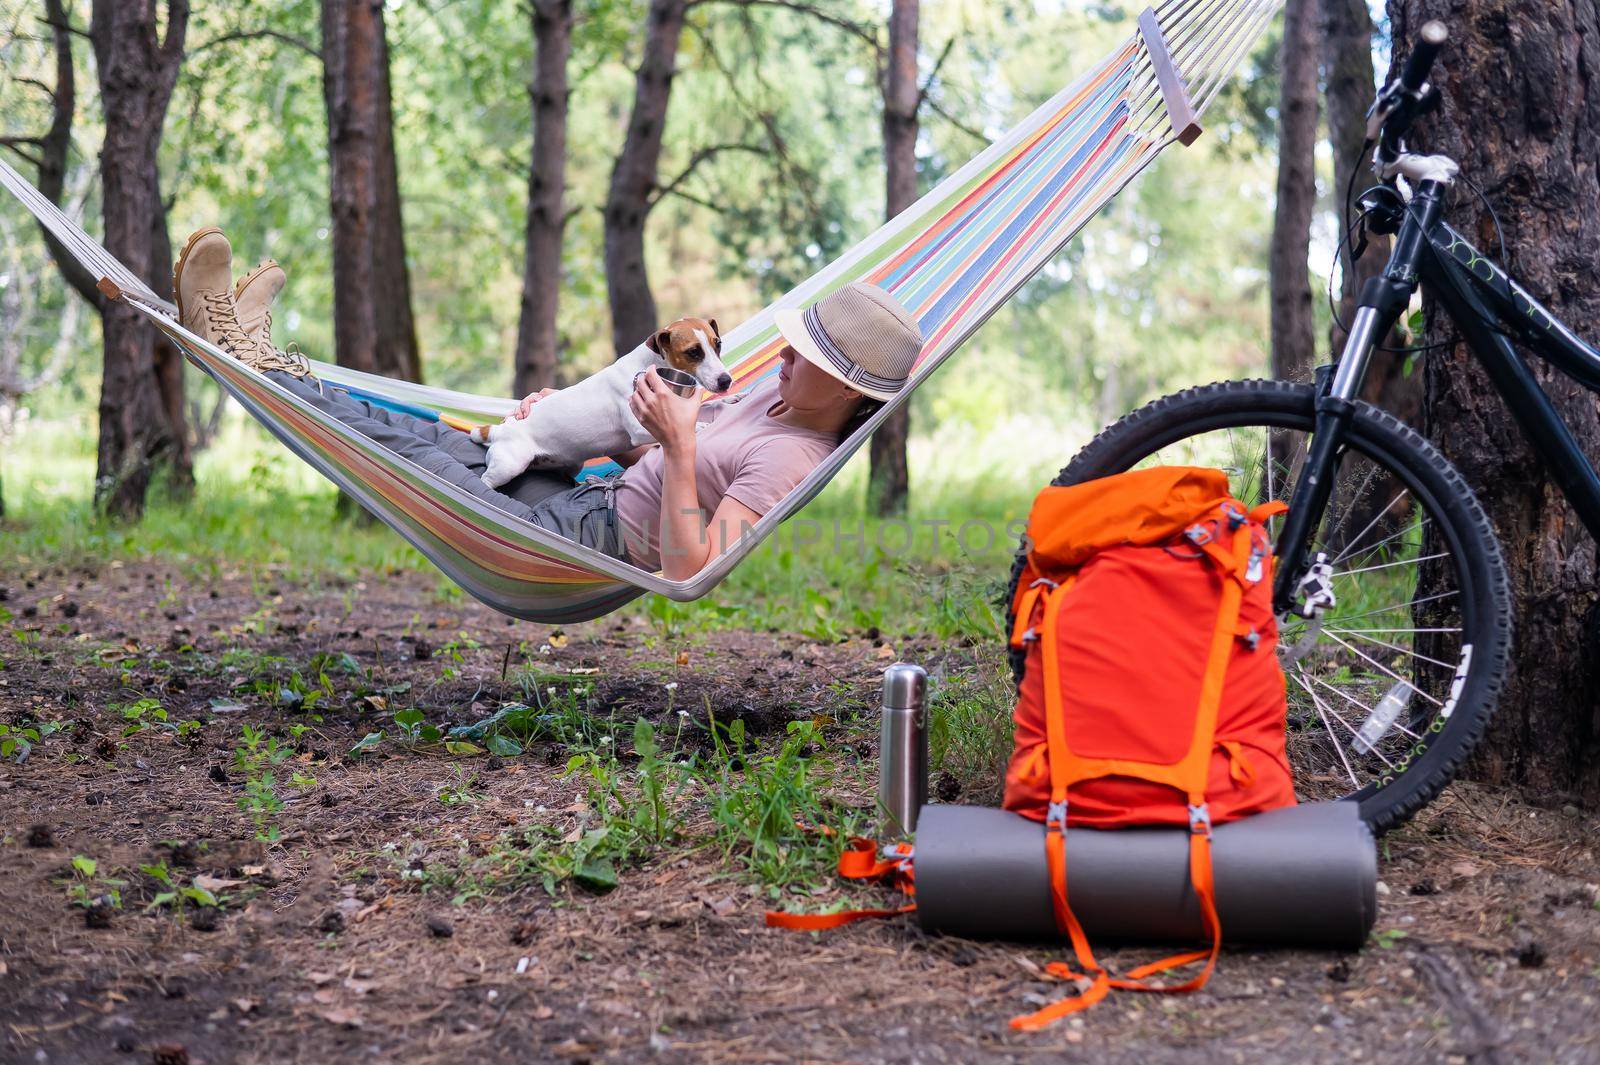 Caucasian woman lies in a hammock with Jack Russell Terrier dog in a pine forest.